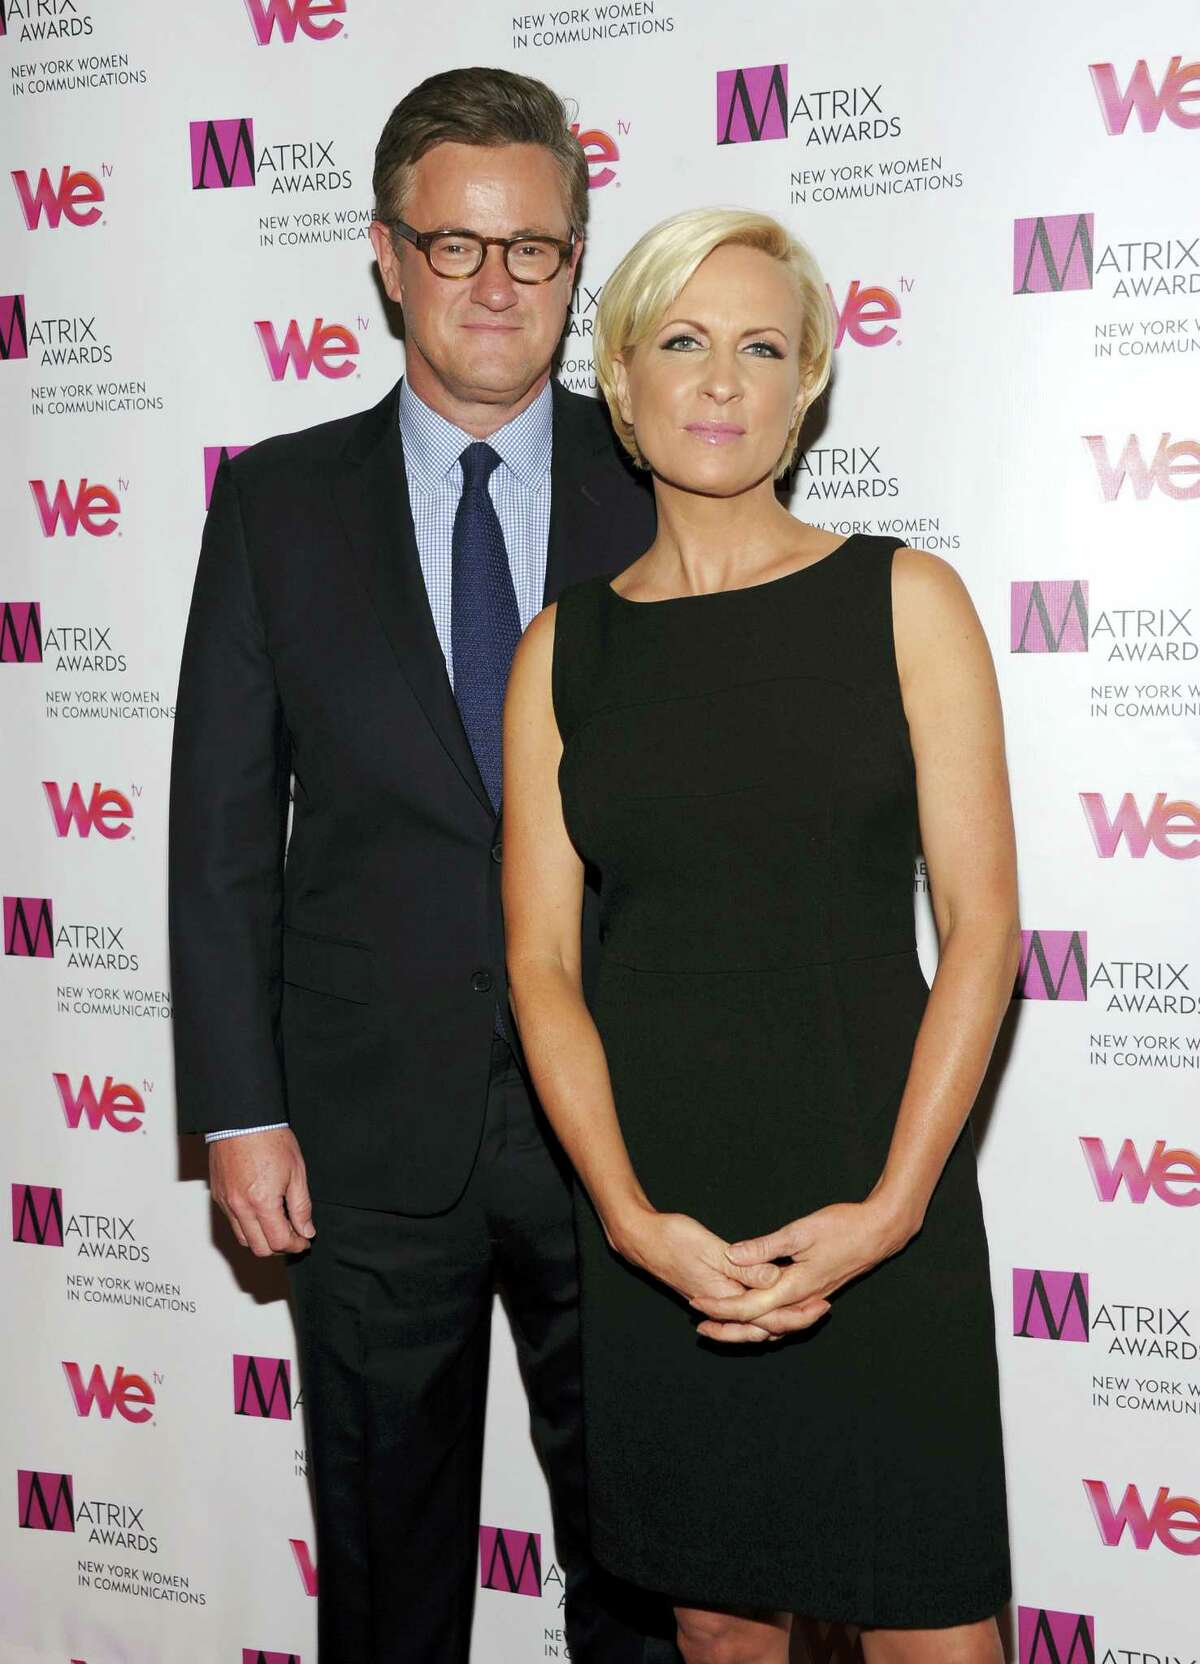 In this April 22, 2013 photo, MSNBC’s “Morning Joe” co-hosts Joe Scarborough and Mika Brzezinski, right, attend the 2013 Matrix New York Women in Communications Awards at the Waldorf-Astoria Hotel in New York. MSNBC confirmed May 4, 2017 that the “Morning Joe” co-hosts are engaged.